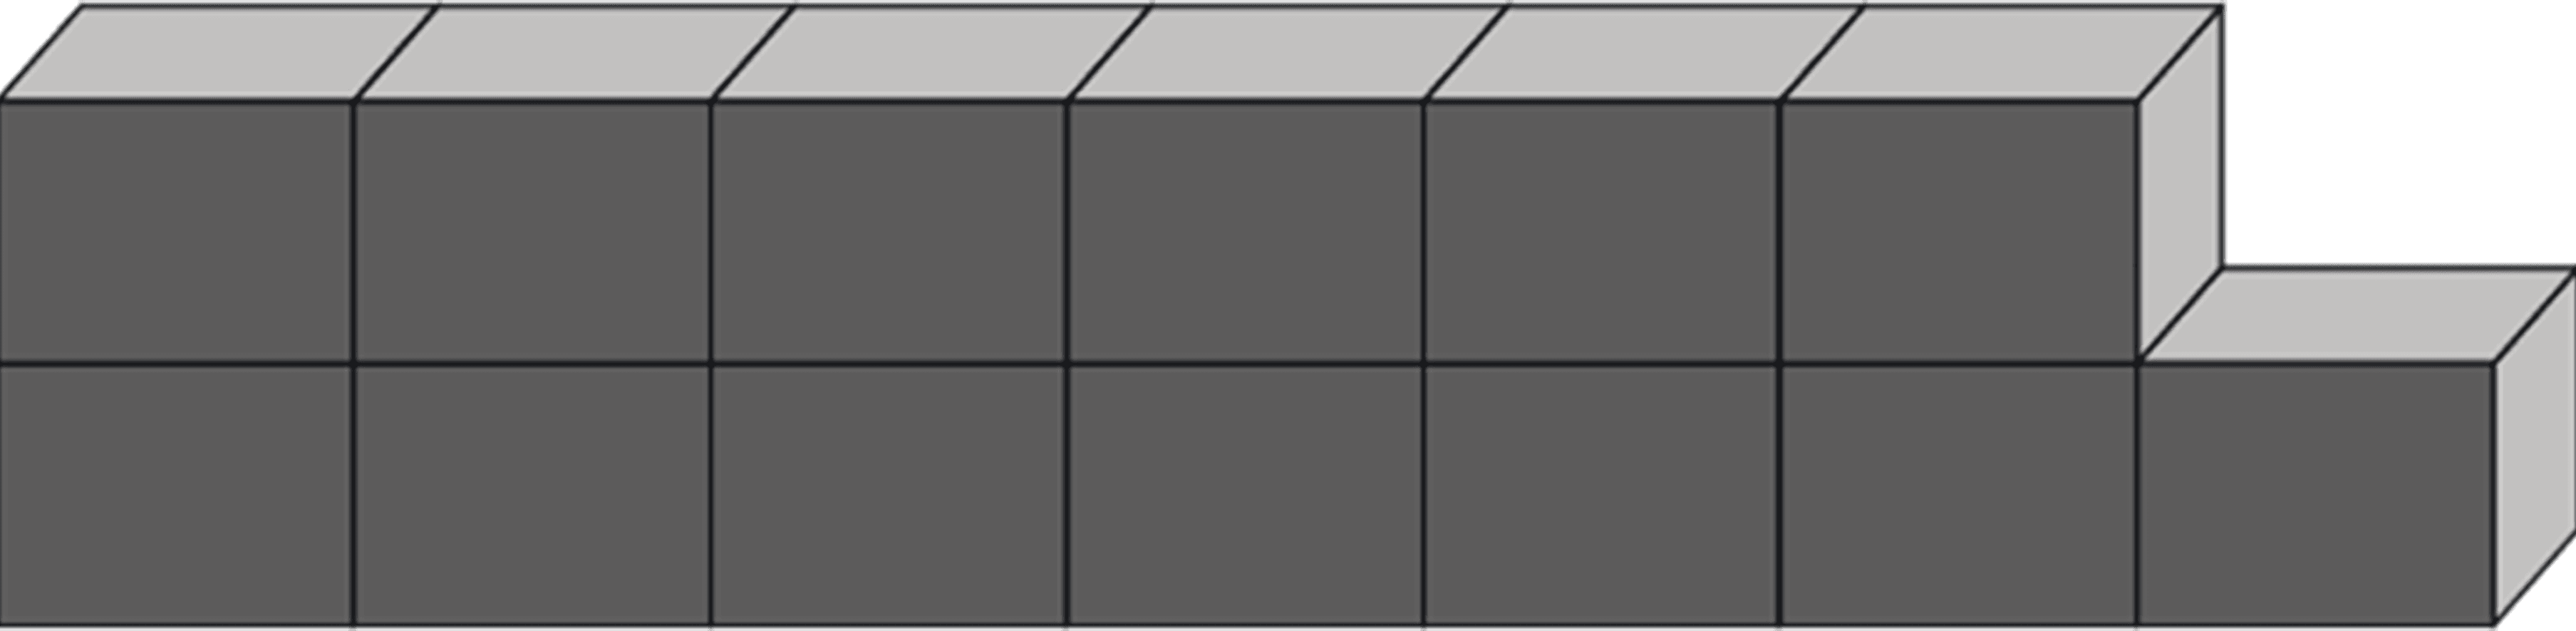 Shapes used by Cubes of centimetres